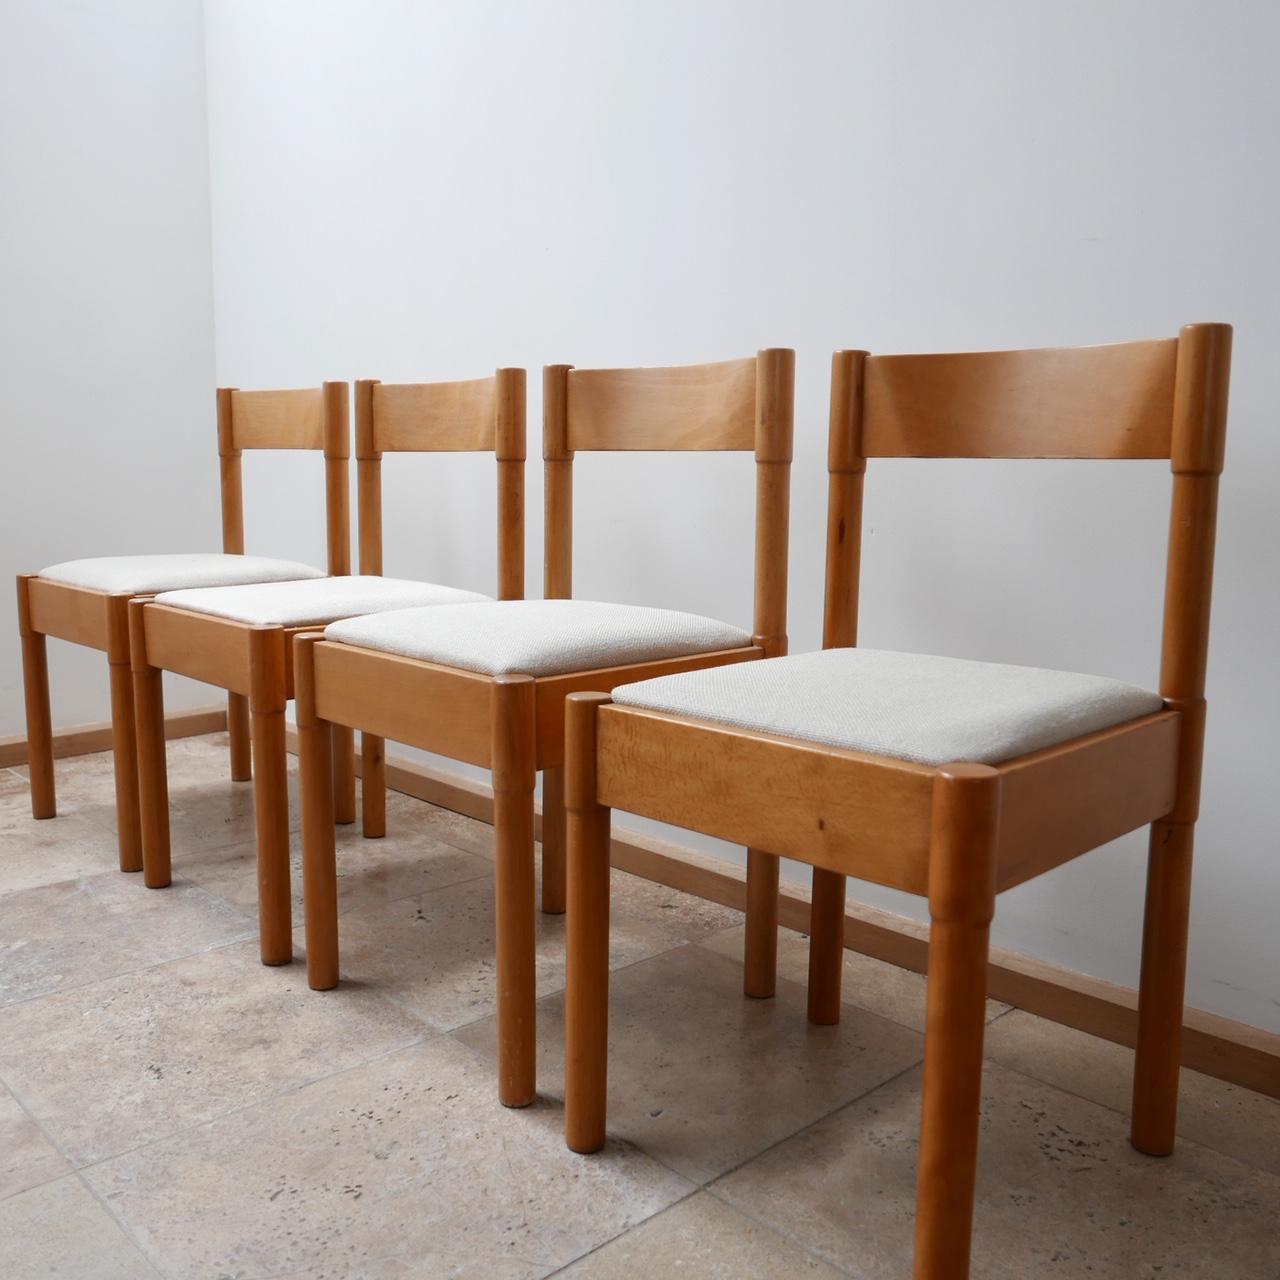 A set of four mid-century dining chairs. 

Beech wood re-upholstered in Italian Linen. 

Likely Danish, c1960s. 

Probably retailed through Habitat. 

Some age related knocks and scuffs commensurate with age. 

Dimensions: 42 W x 43 D x